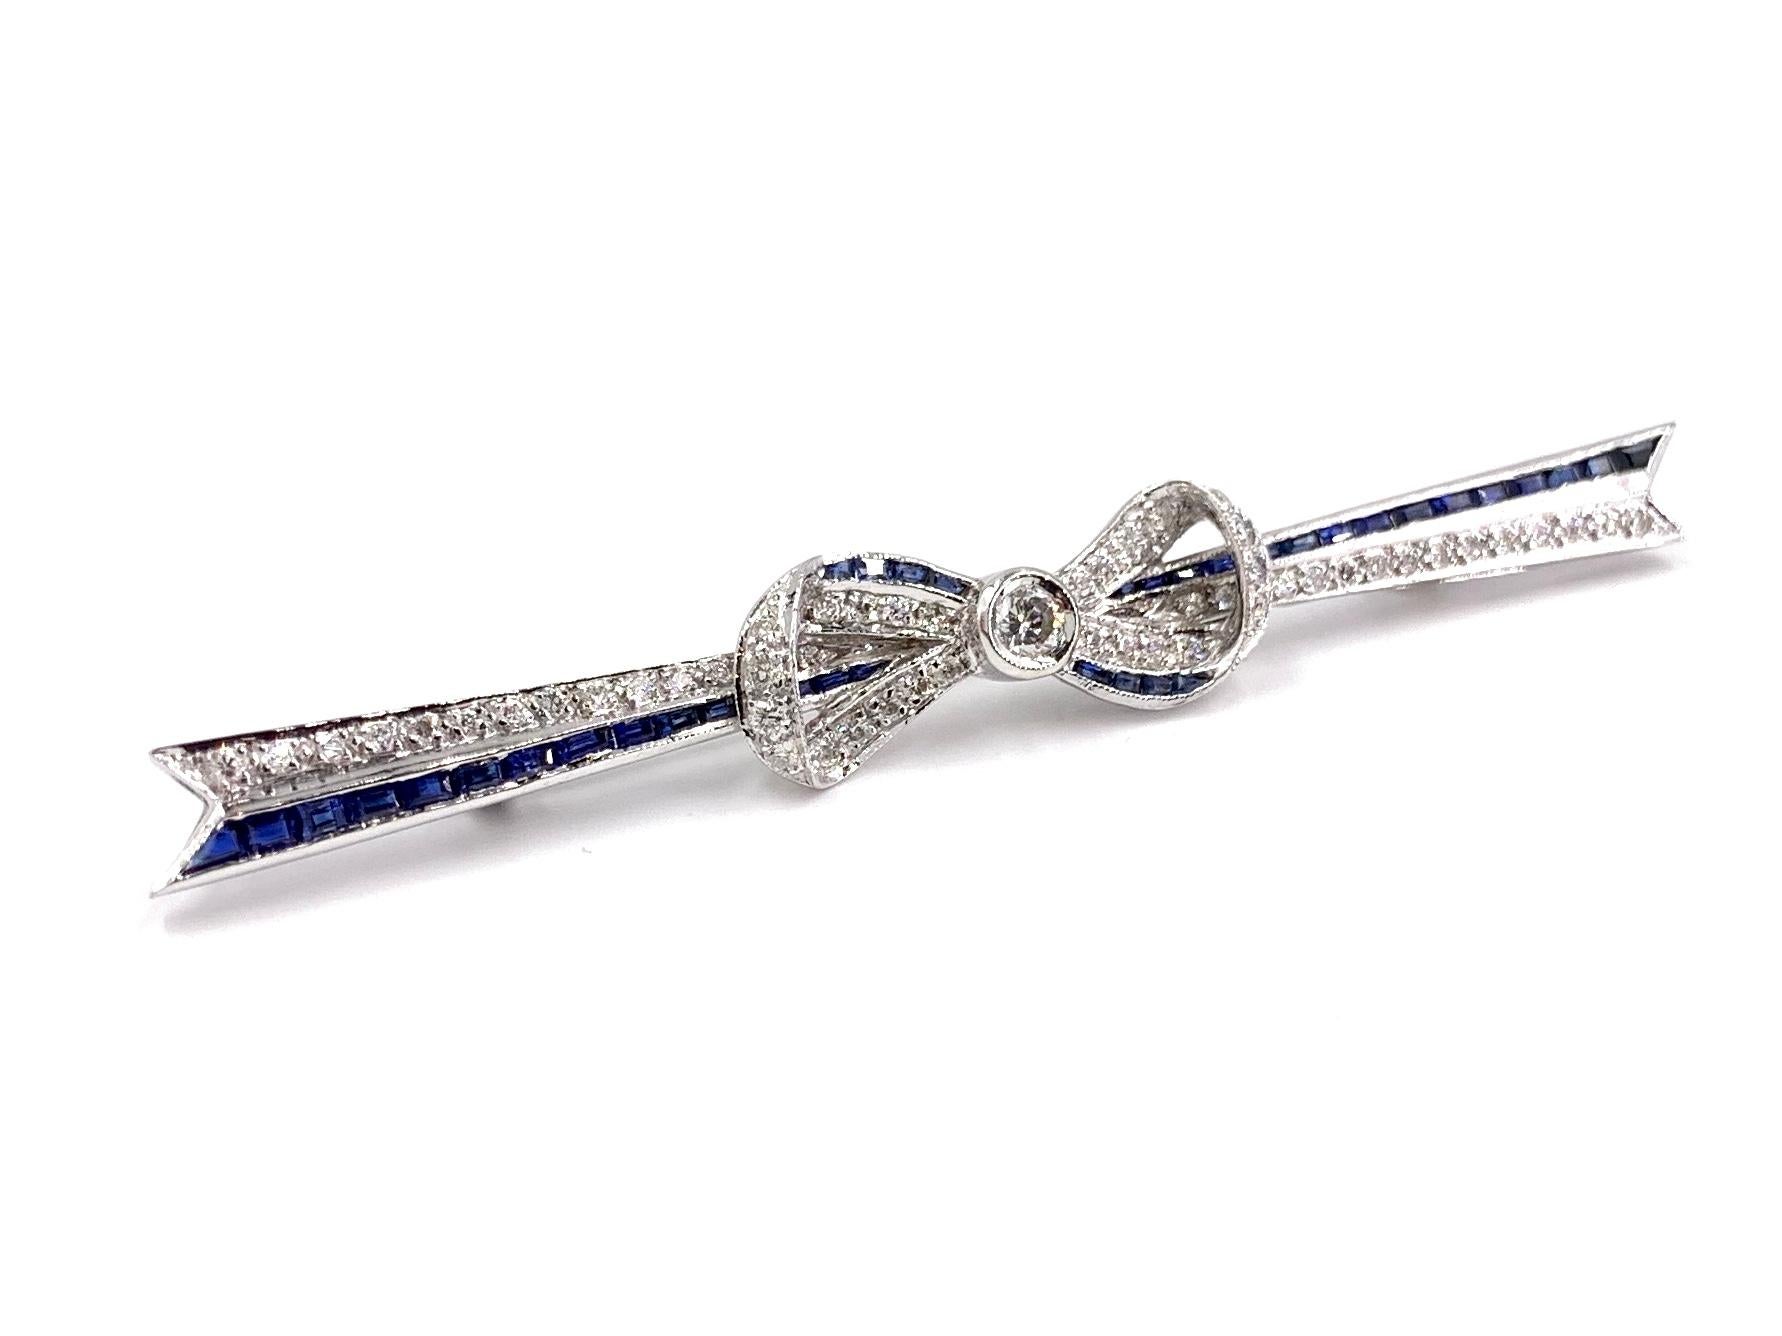 An Art Deco inspired 18 karat white gold horizontal bar style bow motif brooch featuring 2.33 carats of baguette cut blue sapphires and .60 carats of round brilliant white diamonds. Diamond quality is approximately G color, VS2 clarity. Brooch